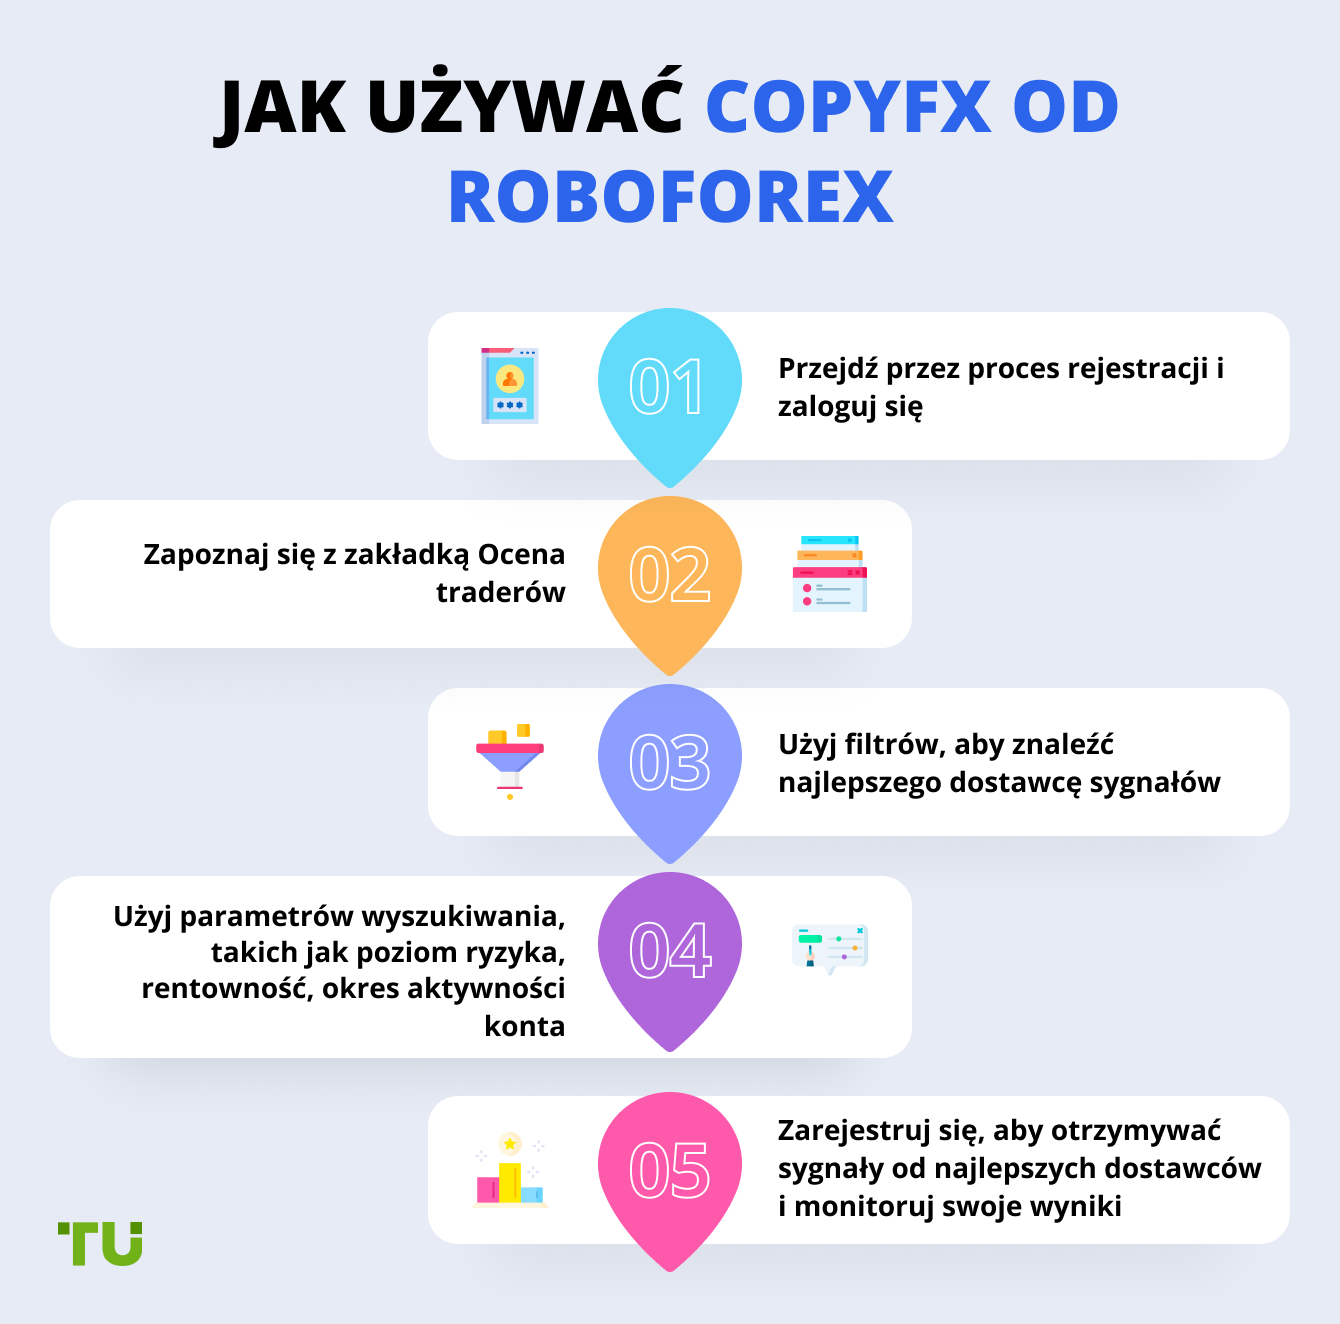 How to Use CopyFX from RoboForex